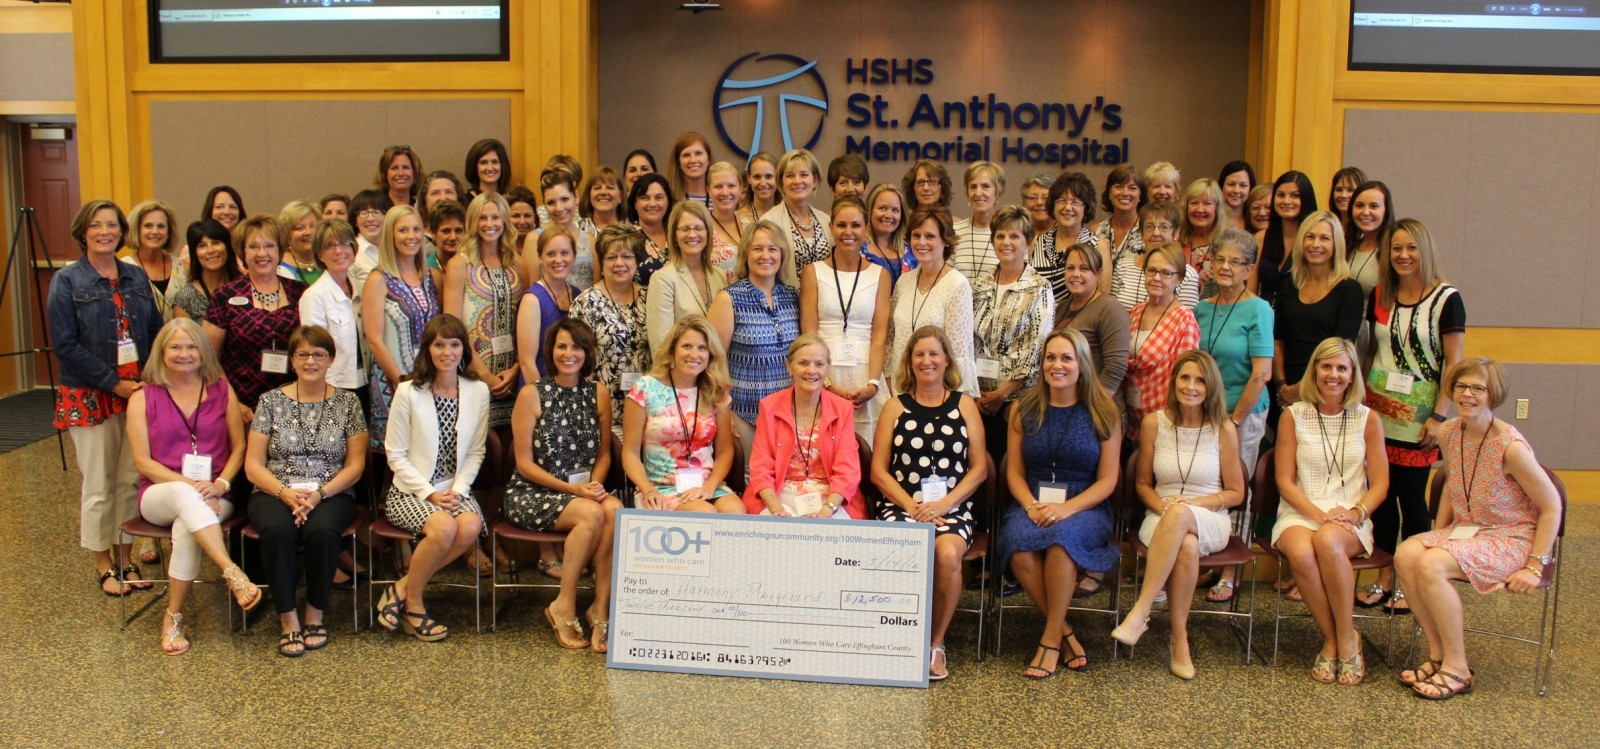 100+ Women Who Care of Effingham County Award $12,500 to Harmony Playground at their July meeting.